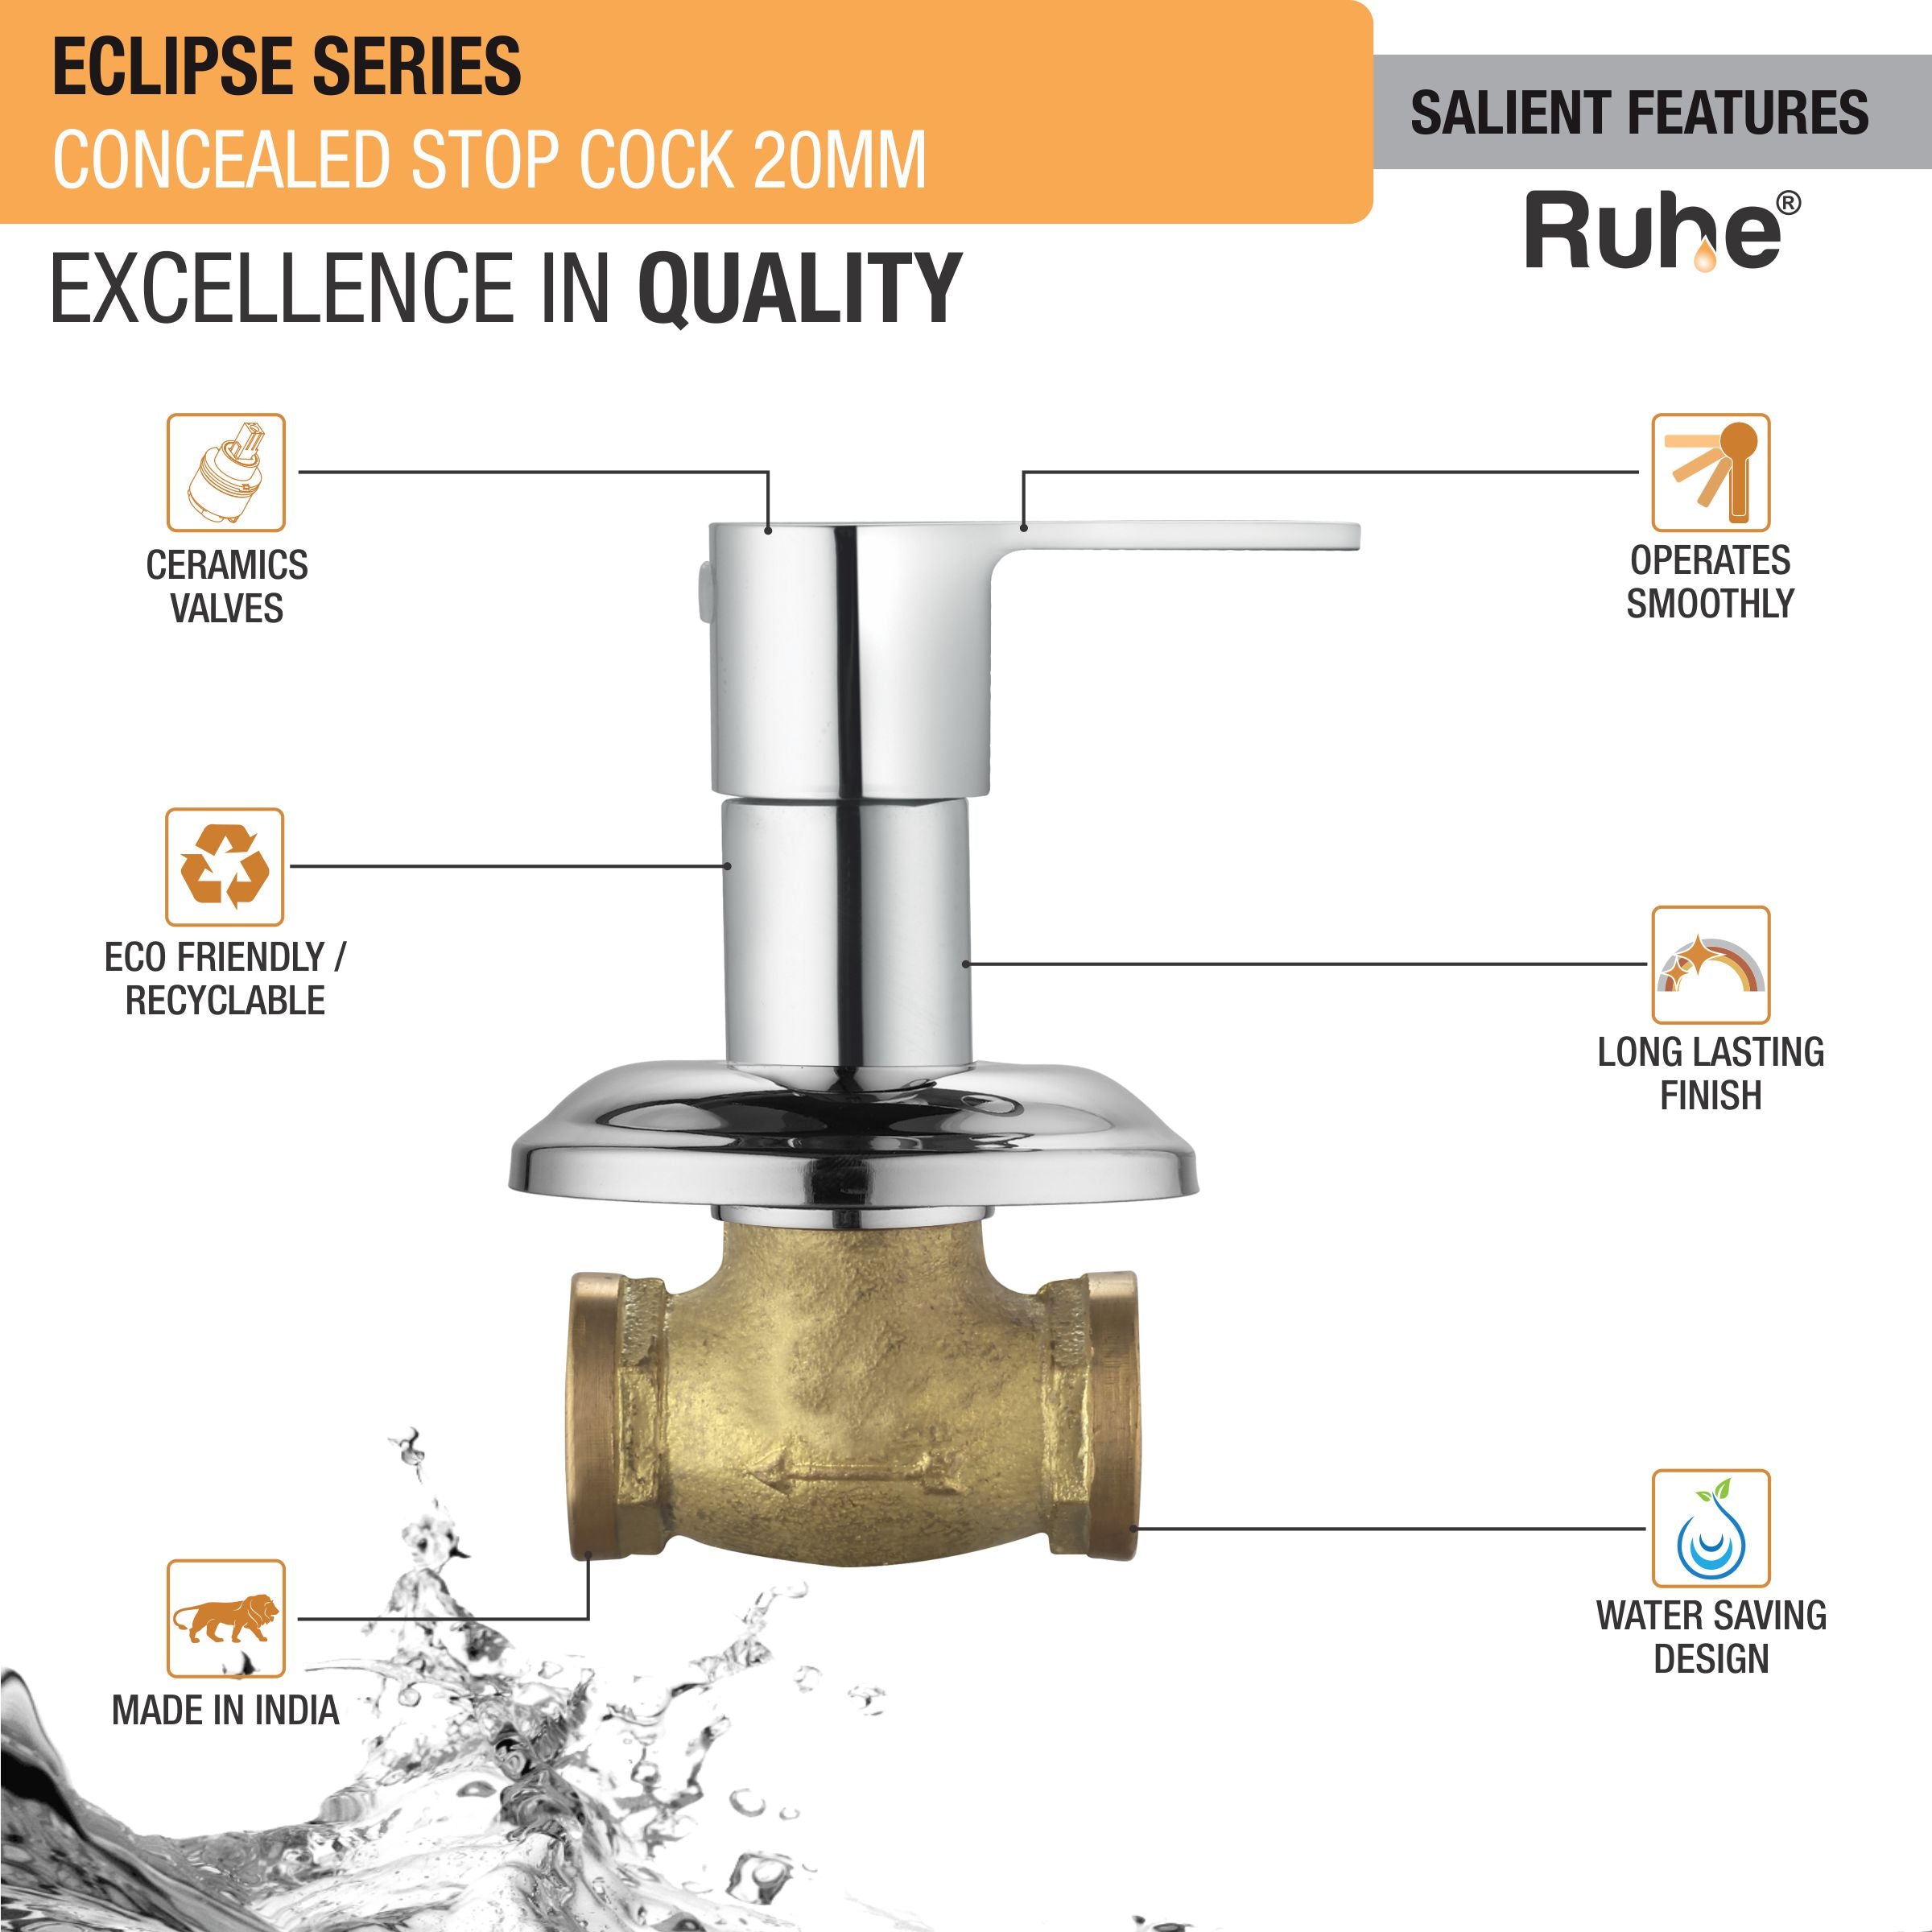 Eclipse Concealed Stop Valve Brass Faucet (20mm) features